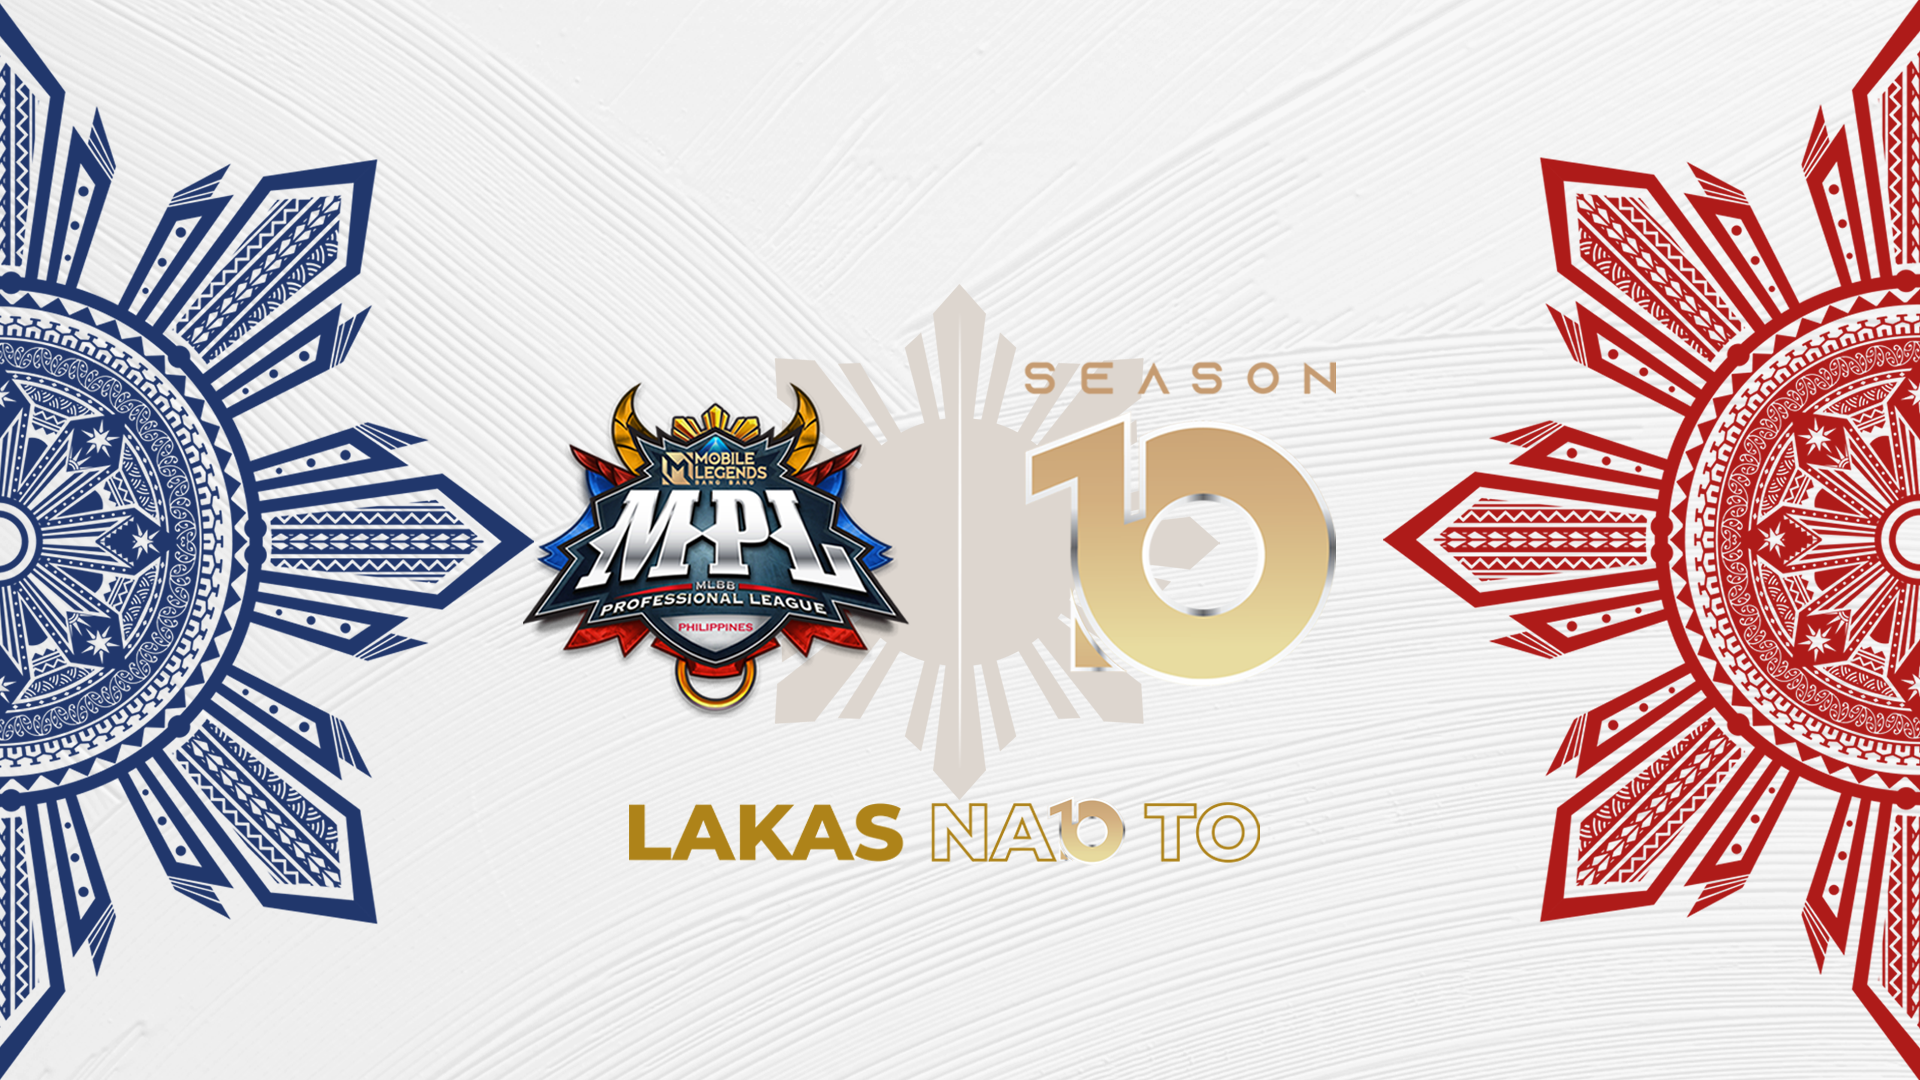 MPL Philippines returns with LAKAS NA10 TO on 12 August for Season 10!